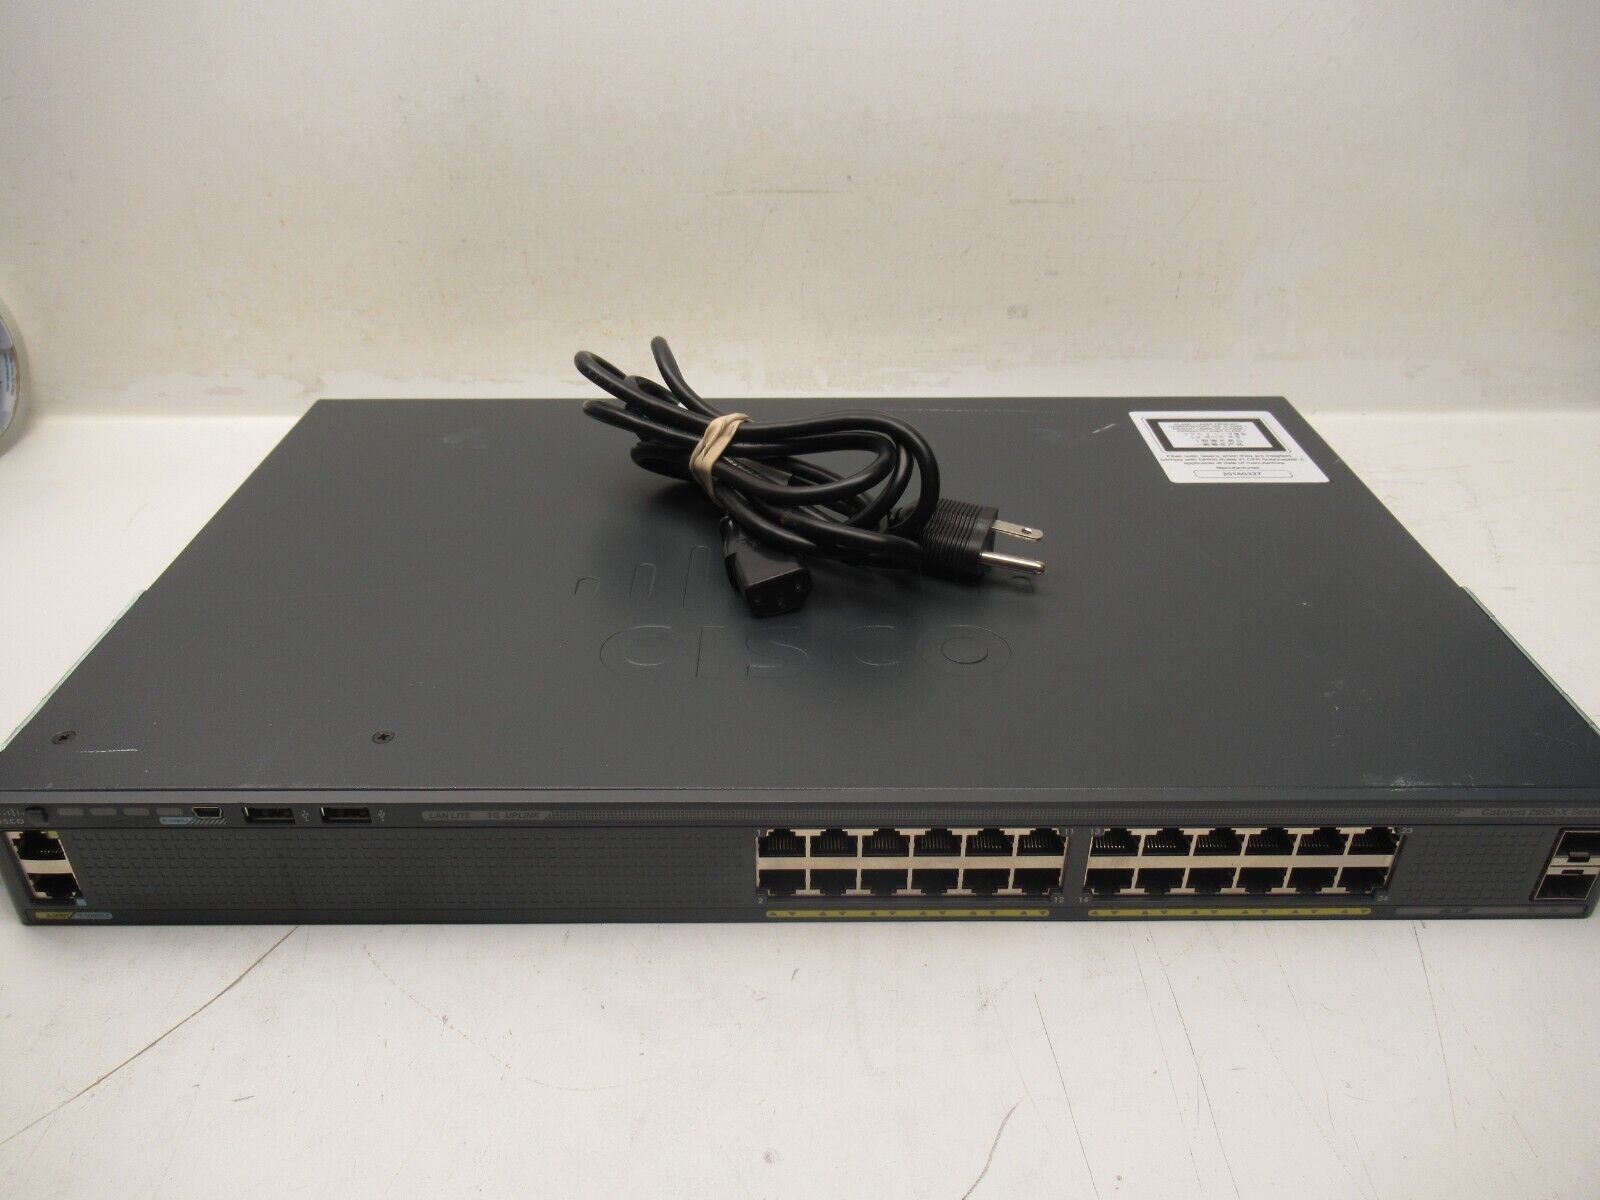 Cisco Catalyst 2960-X WS-C2960X-24TS-LL V03 24-Port Switch With Power Supply